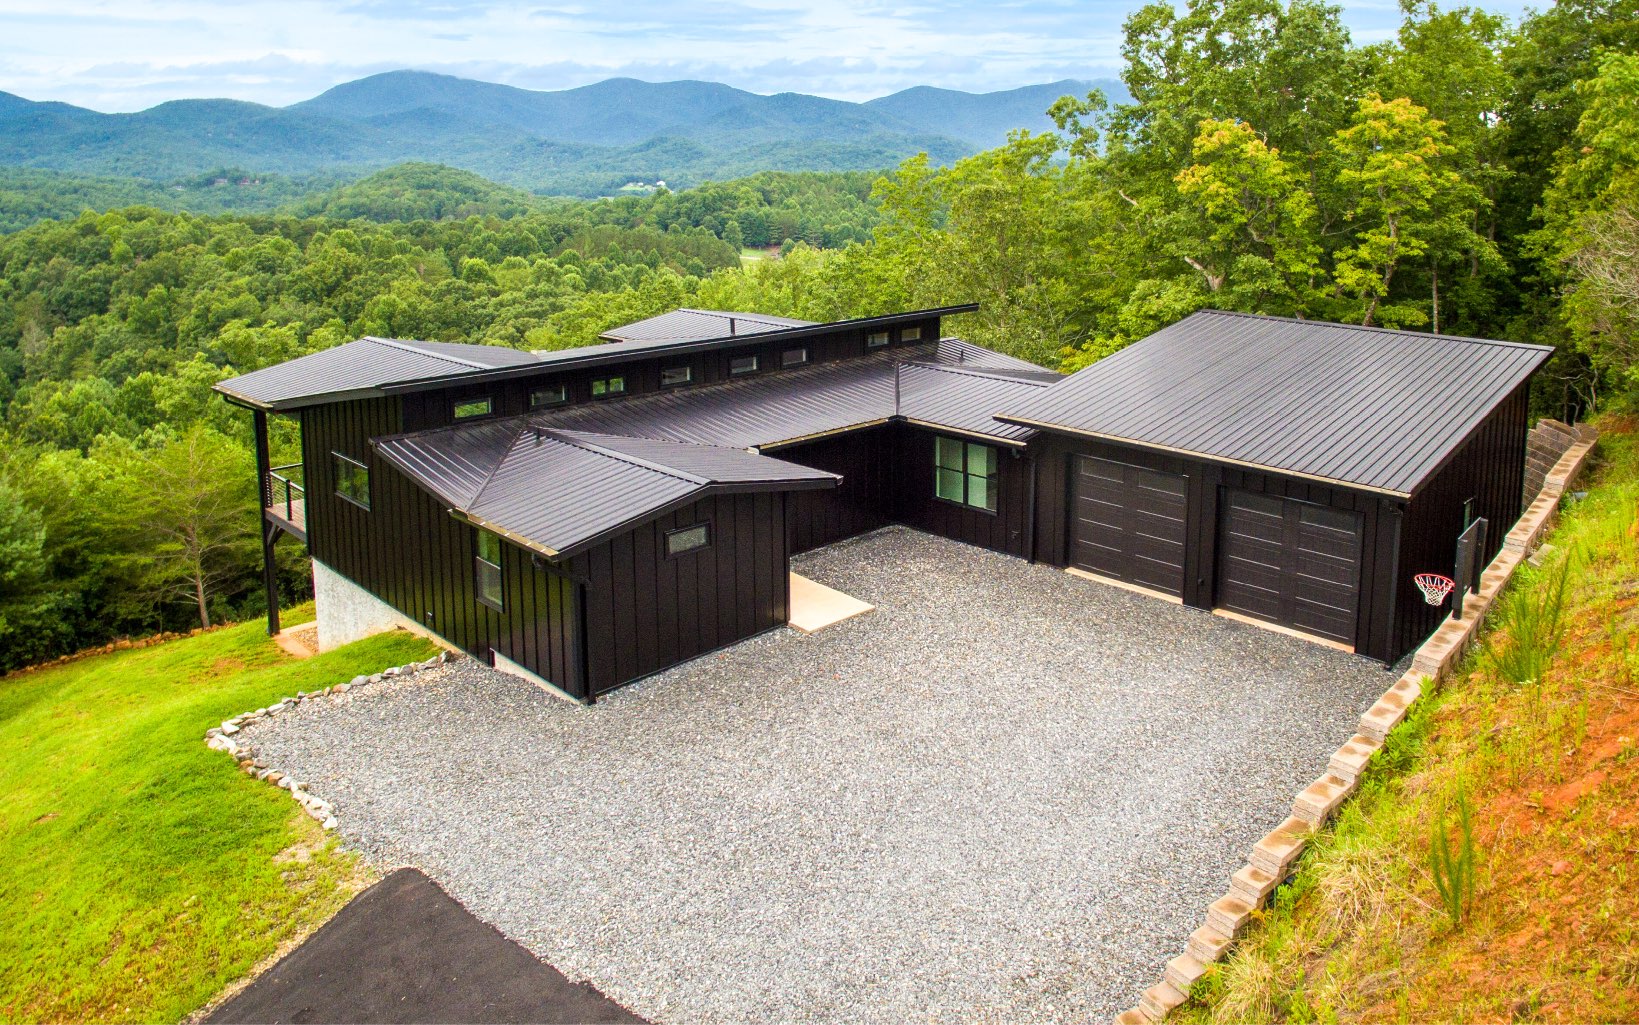 A CLASSIC MODERN HOME IN THE NORTH GEORGIA MOUNTAINS WITH PANORAMIC MOUNTAIN & VALLEY VIEWS ON 1.71 ACRES OF PRIVACY!! Patrick Construction Inc. sets the standard for energy efficient, low maintenance homes in the North GA & Western North Carolina area. This classic modern home offers an open floor plan, clean lines and sharp contrast, with approximately 1700 sf on the main floor, approximately 1500 on the lower with an attached oversized 2 car garage. It features Standing seam metal siding in all black with multiple layers of radiant protection beneath. Spray foam insulated with Marvin Integrity windows and doors, inset custom cabinets, high quality fixtures throughout. Stainless cable railings, IPE decking, zero entry shower, custom shelving and built ins. The main level features a great room with lots of glass to enjoy the views, 2 bedrooms/2 bathrooms, kitchen, laundry room and expansive covered & open air deck. The lower level features 2 additional bedrooms & 1 bathroom, a living room and storage room.